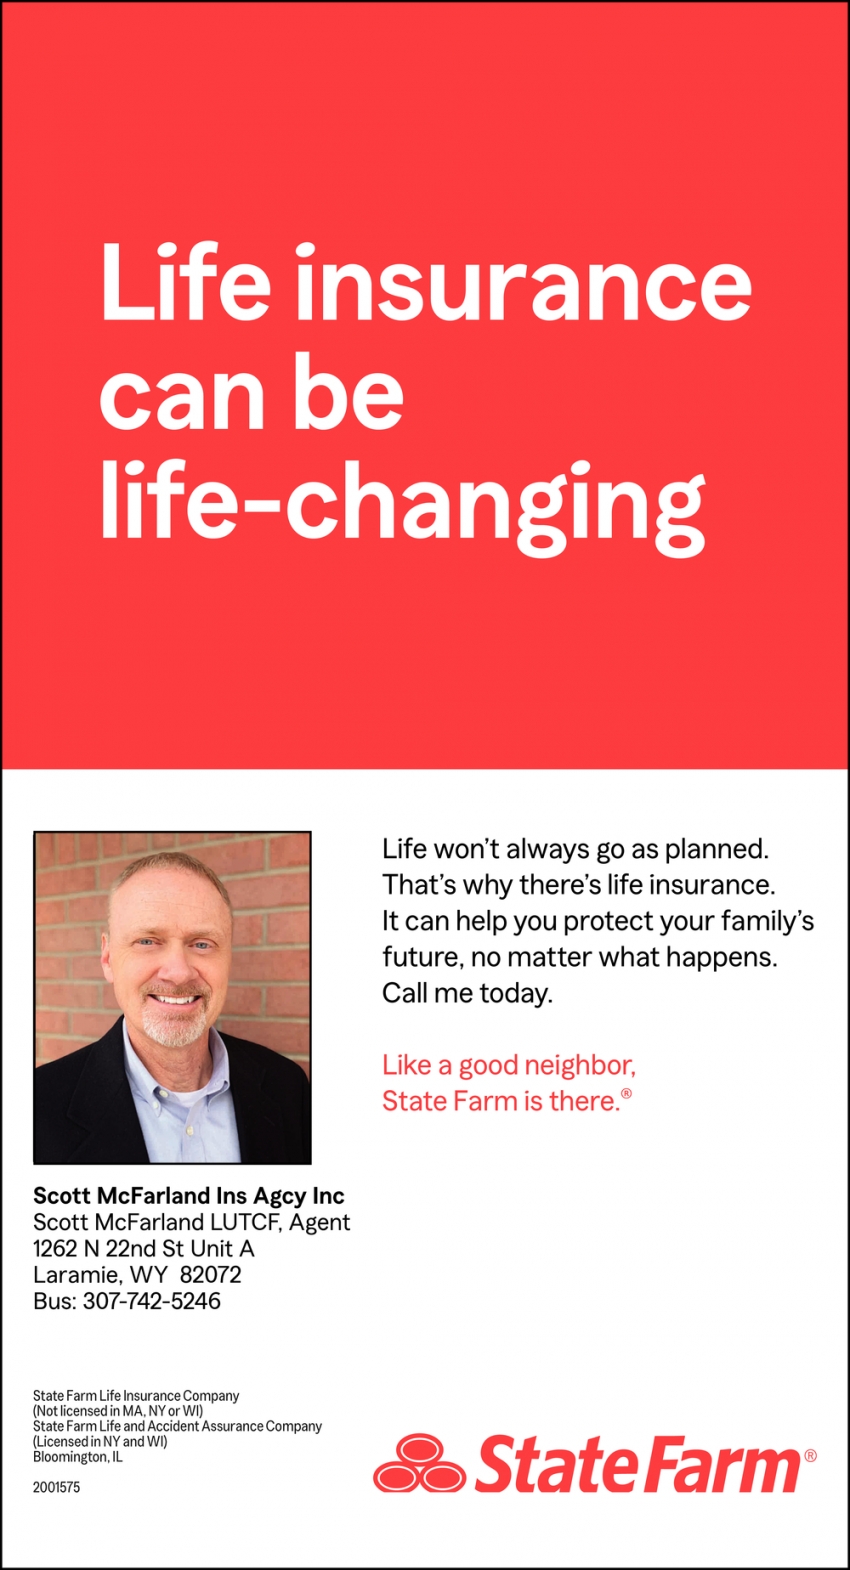 Life Insurance Can Be Life-Changing